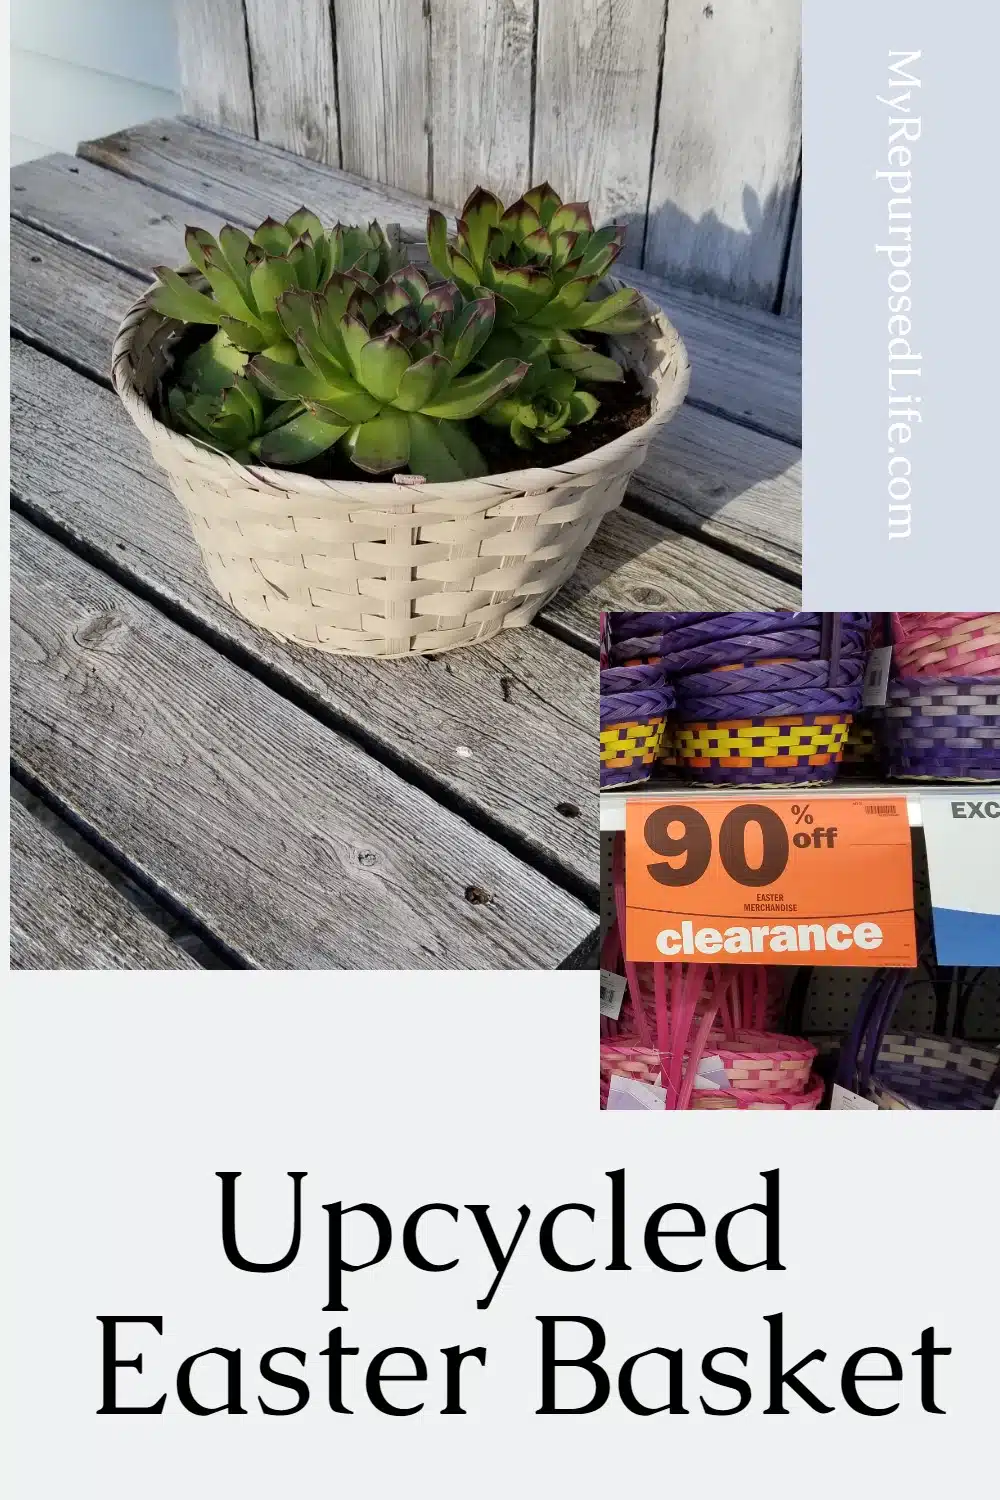 How to make a basket succulent planter out of a clearance priced wicker Easter basket. I used an Easter basket, you could easily update a thrift store basket in the same way. This easy spray paint project will have you looking at baskets in a whole new way. #MyREpurposedLife via @repurposedlife